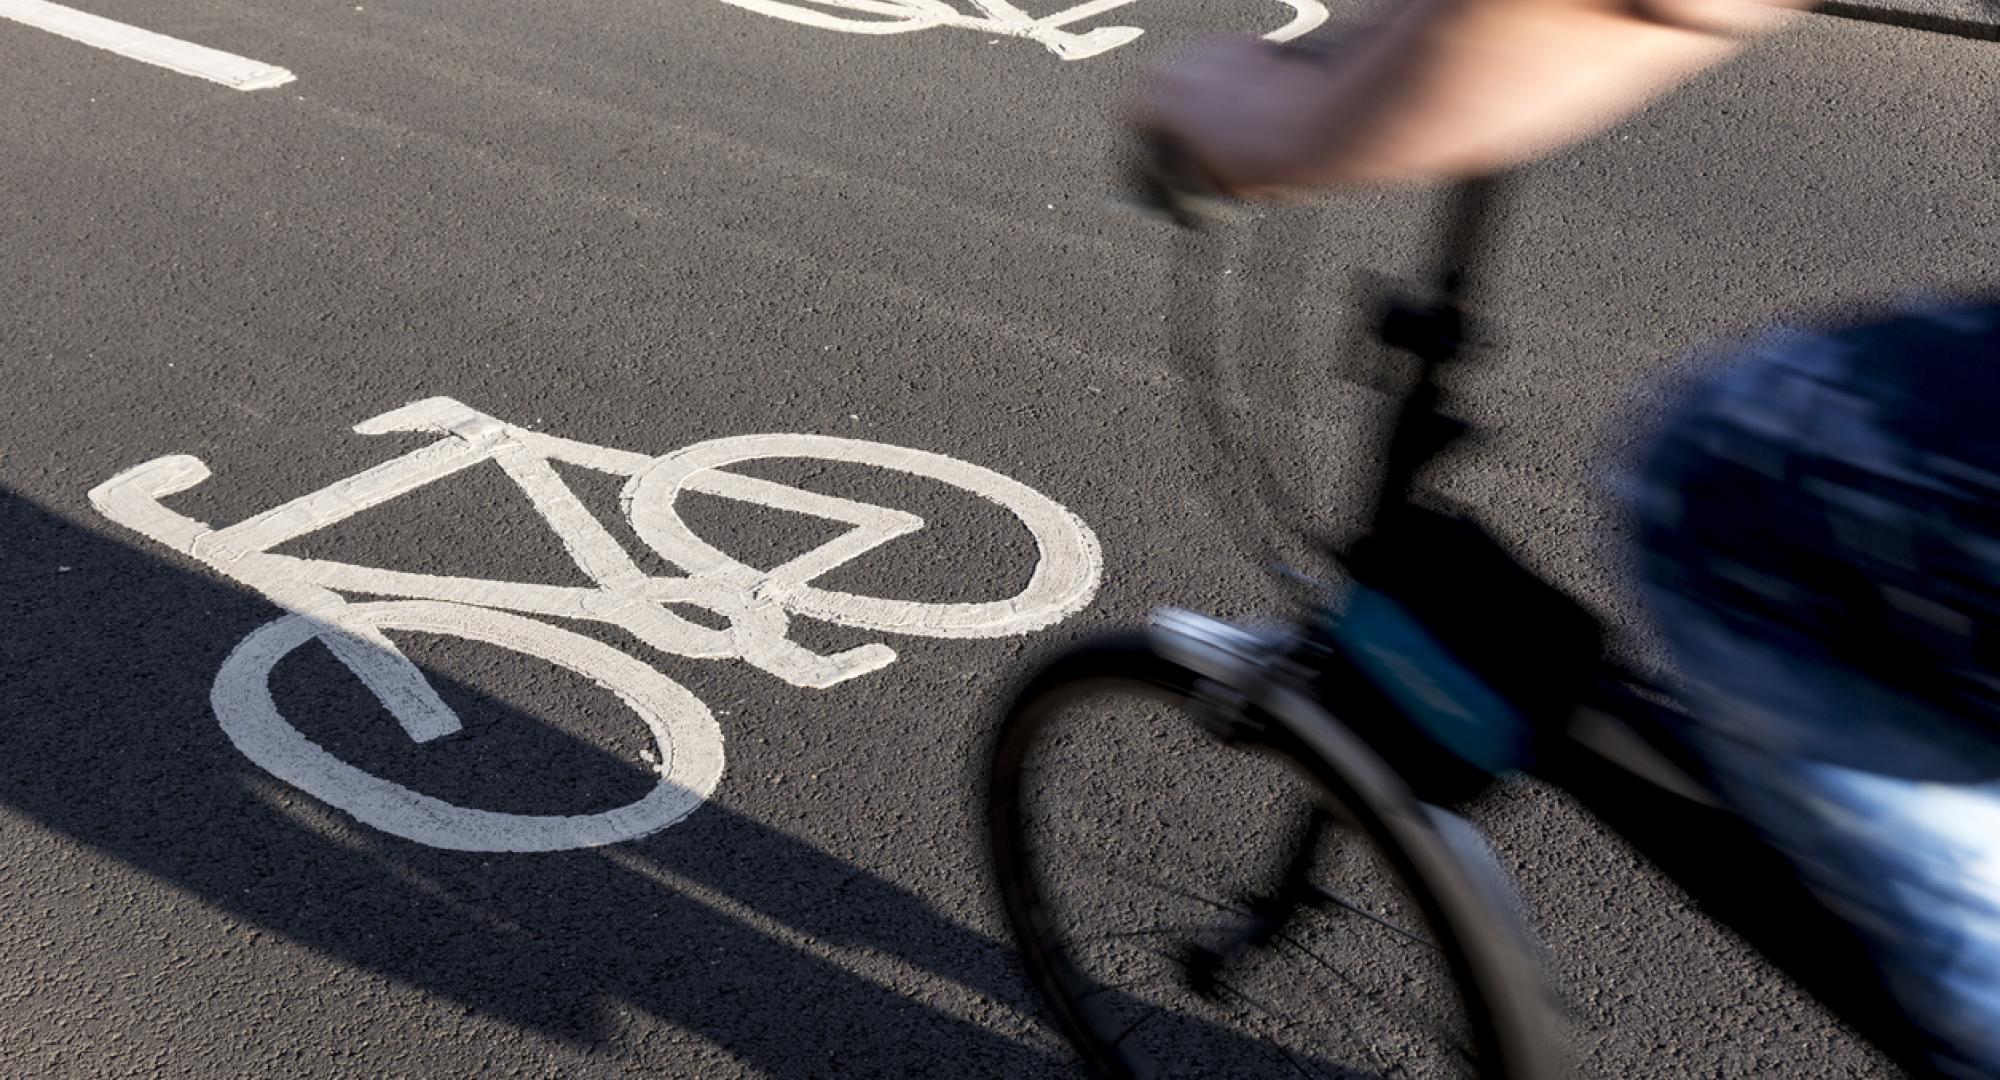 image of someone riding on a cycle path